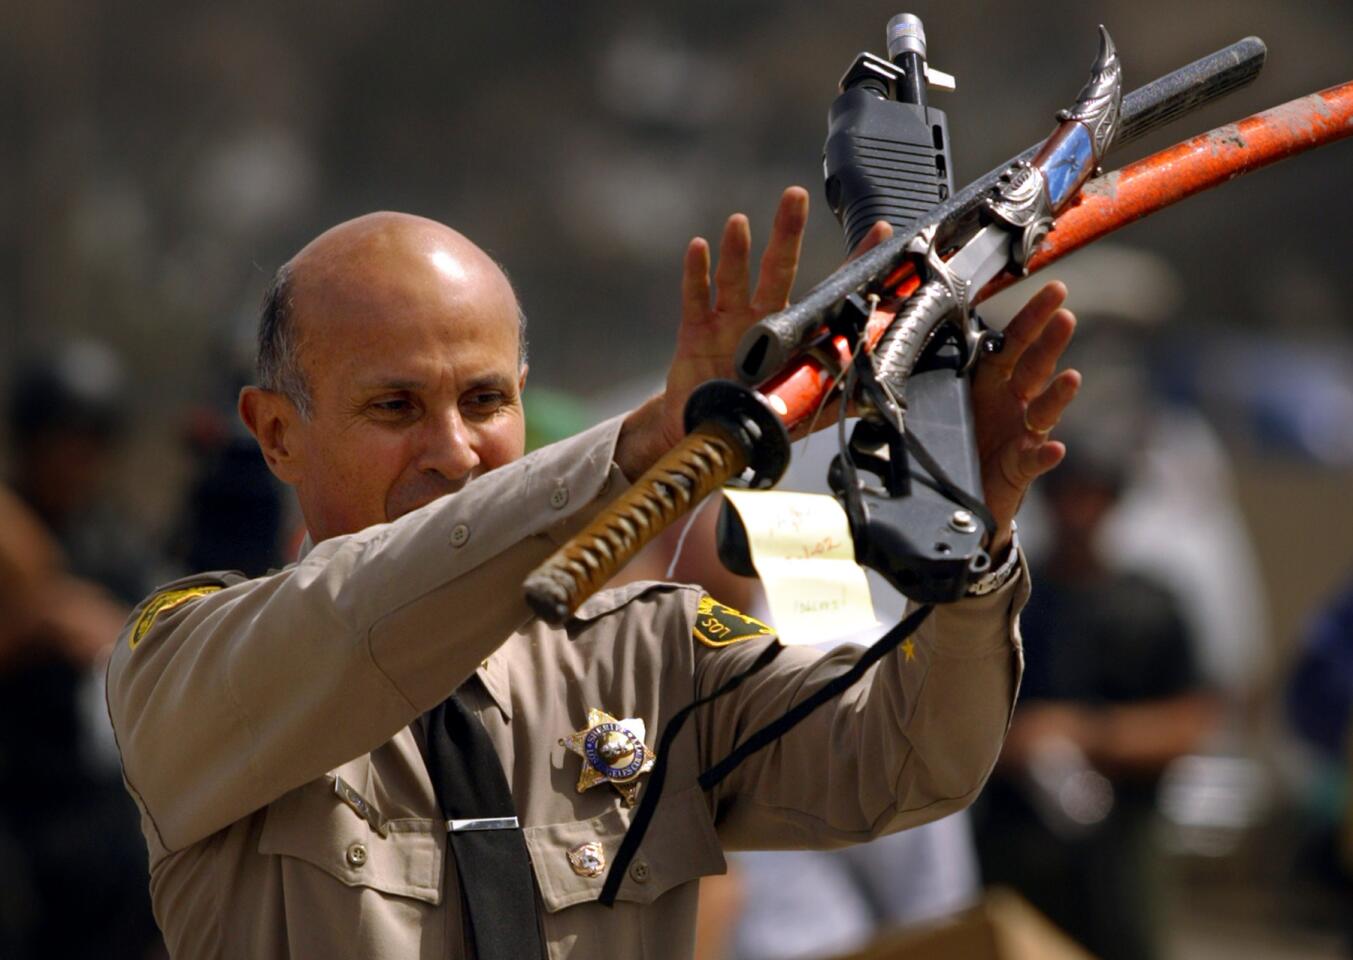 Sheriff Lee Baca shows weapons confiscation